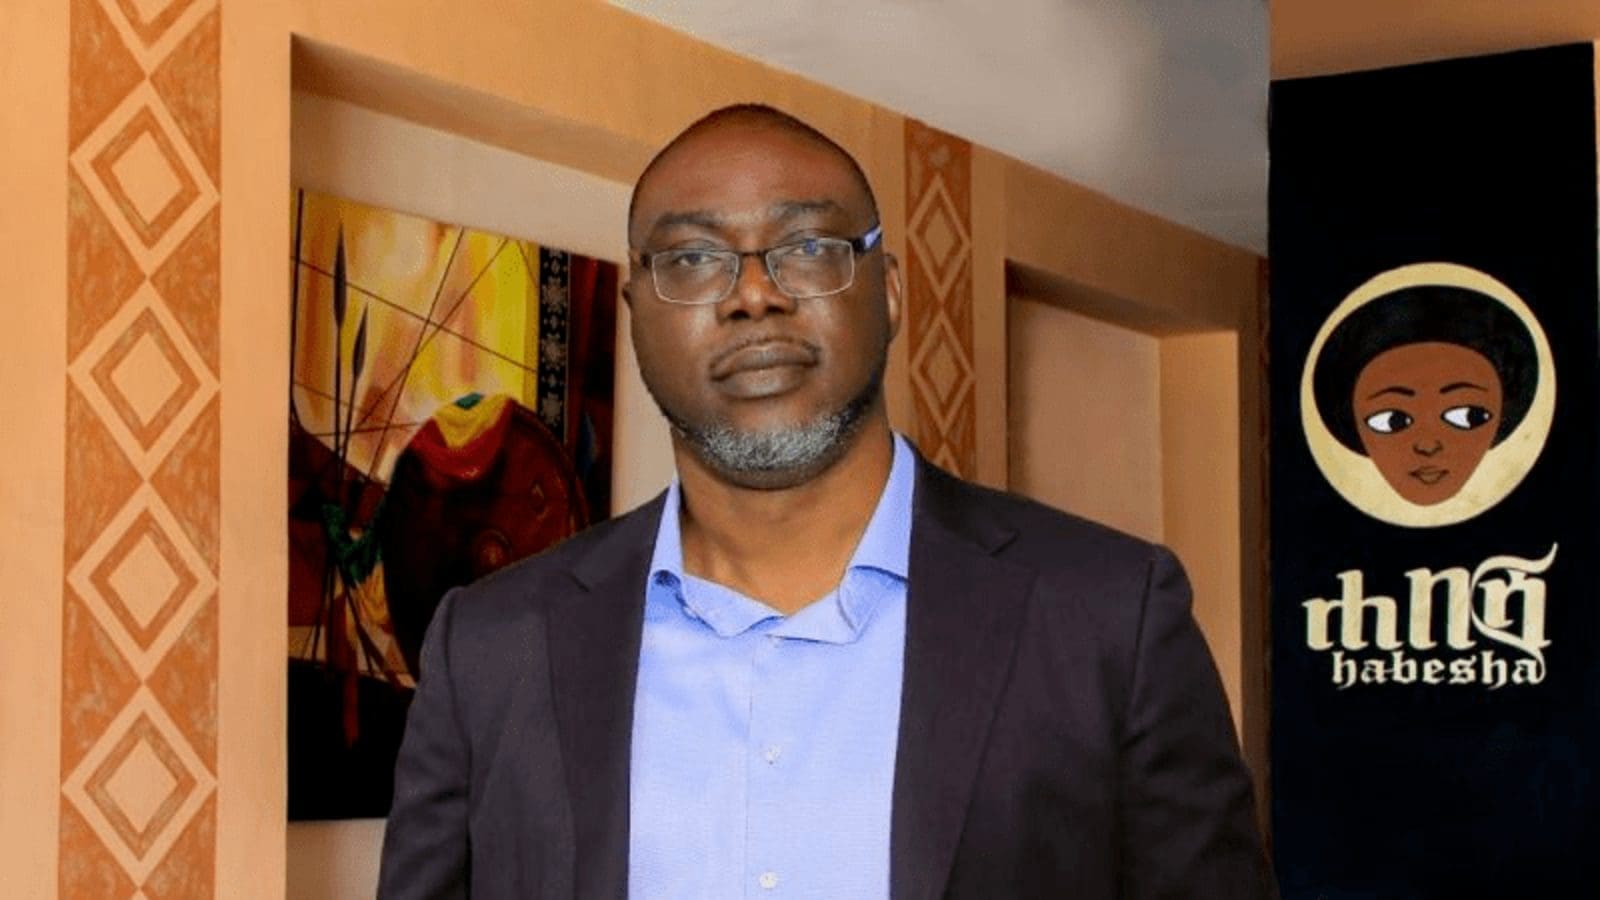 Habesha Breweries appoints Omo Ohiwerei as new CEO